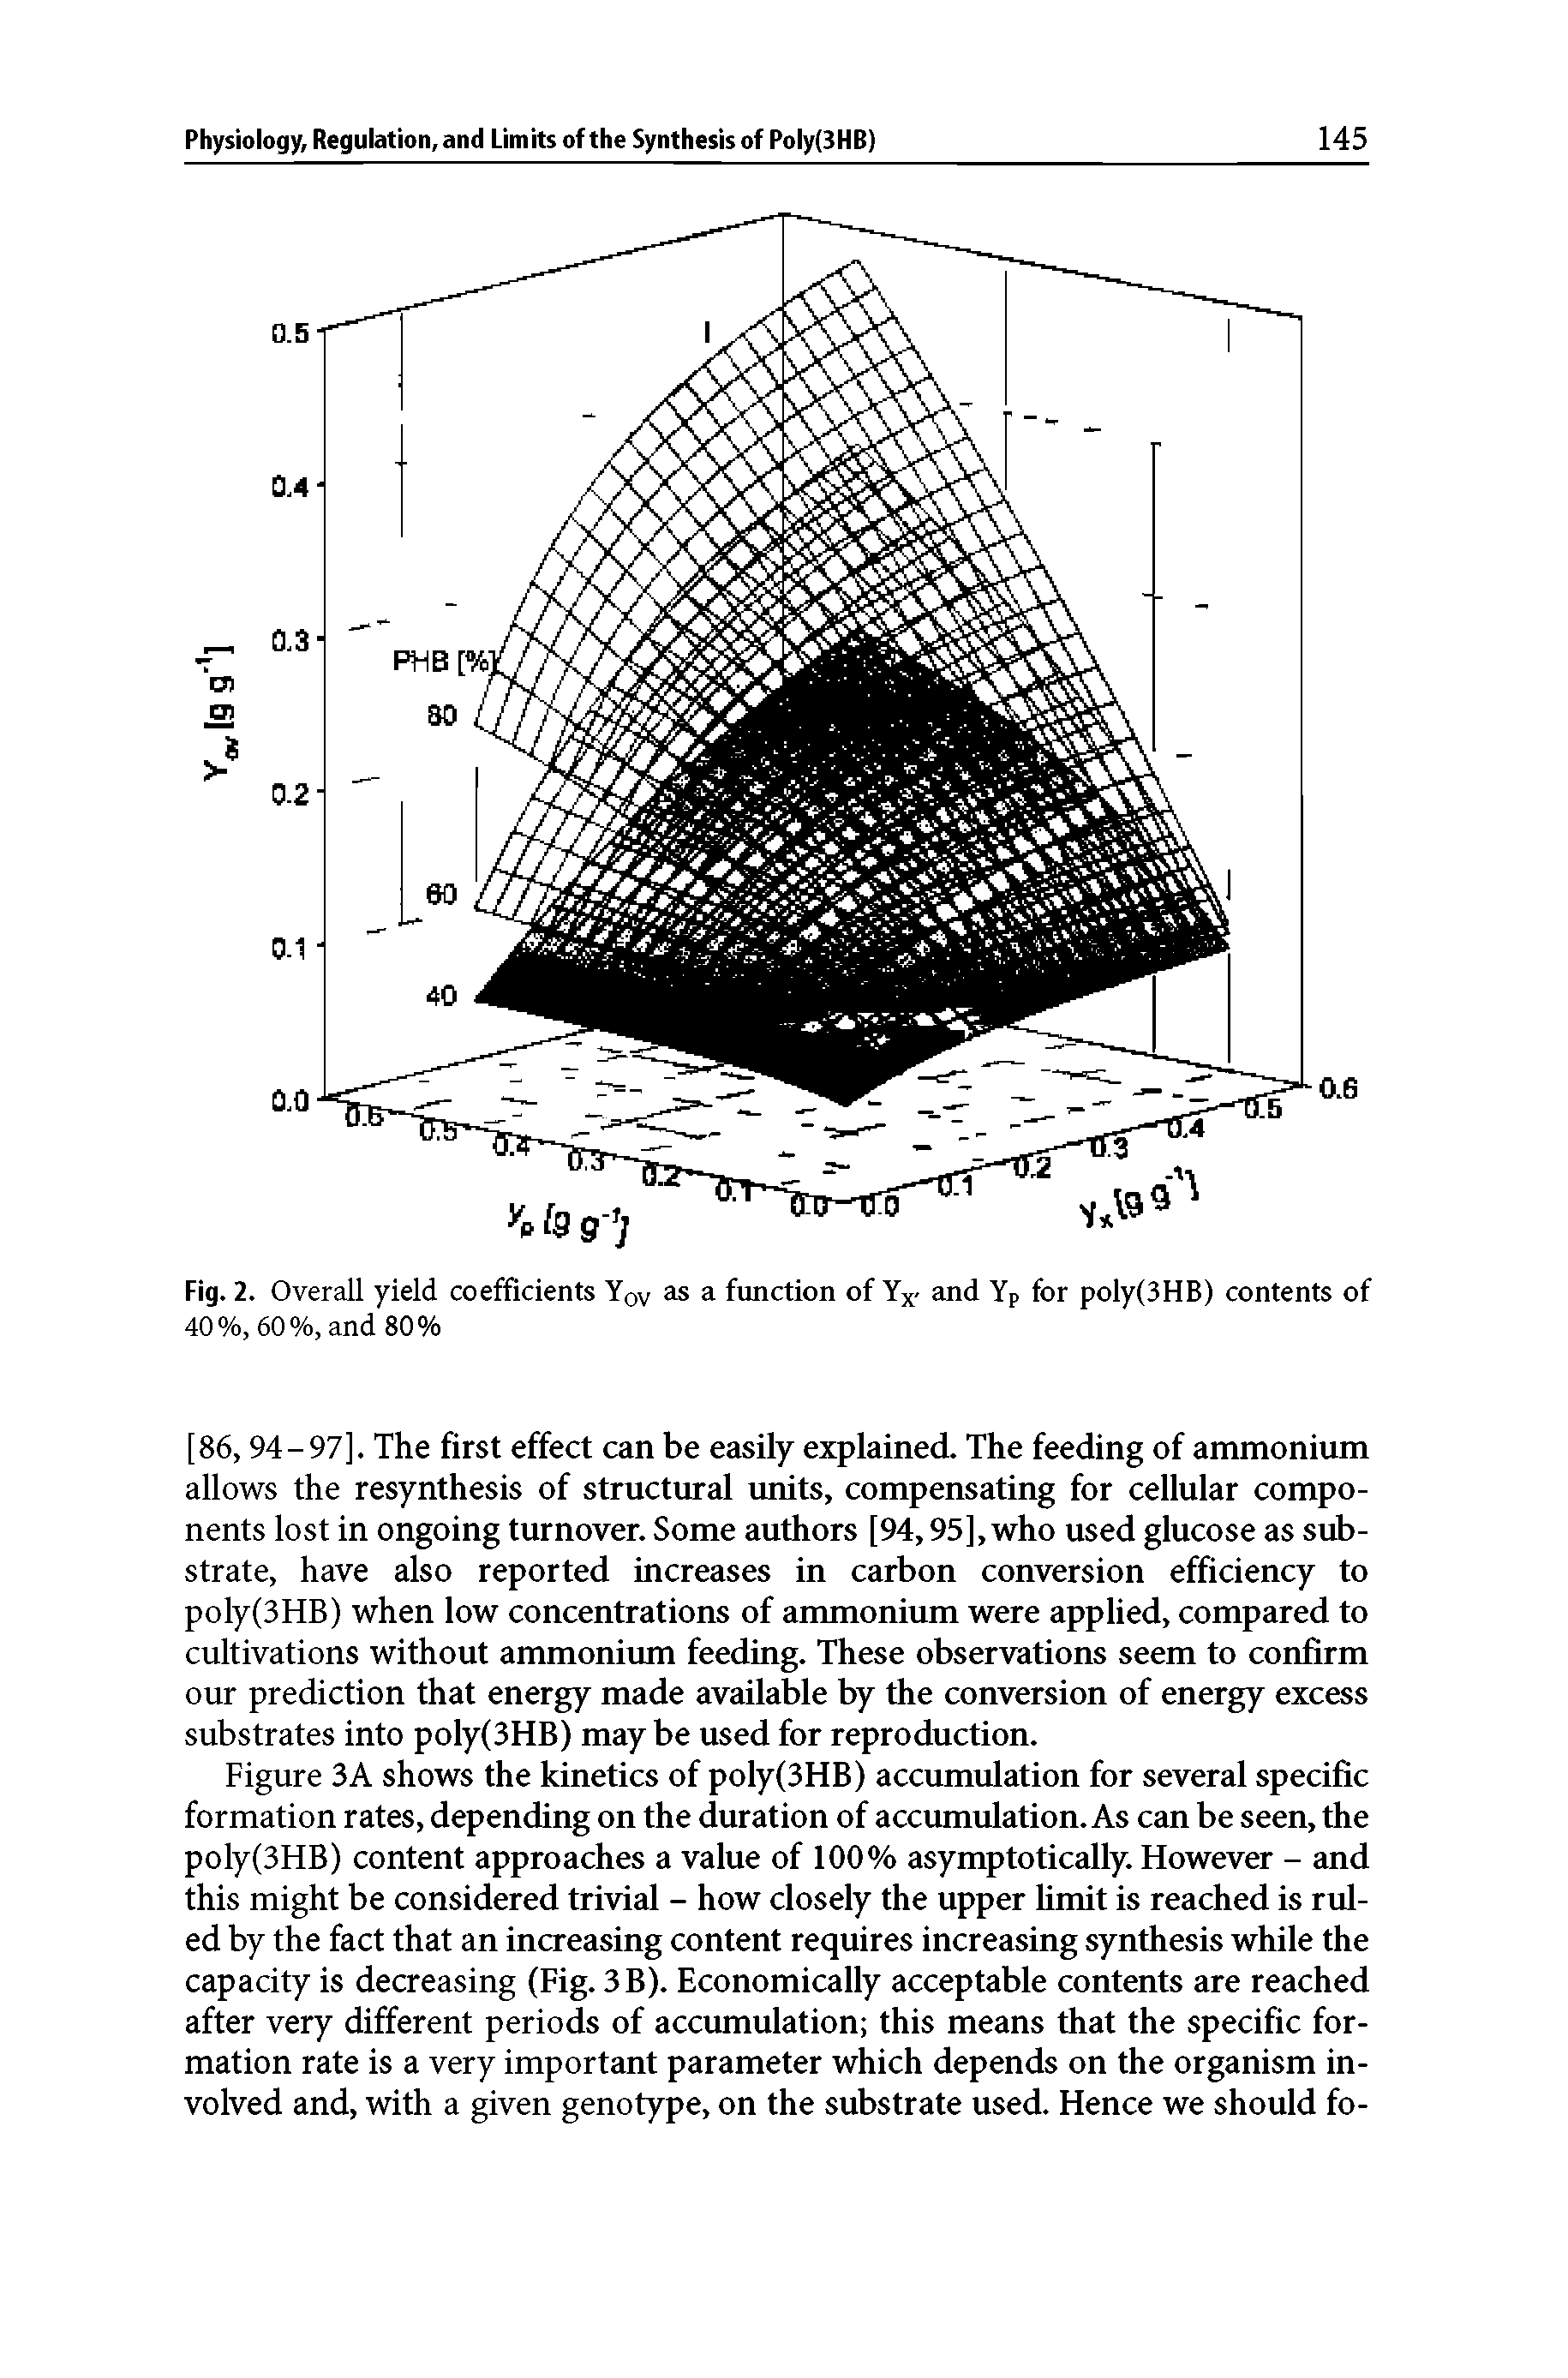 Figure 3A shows the kinetics of poly(3HB) accumulation for several specific formation rates, depending on the duration of accumulation. As can be seen, the poly(3HB) content approaches a value of 100% asymptotically. However - and this might be considered trivial - how closely the upper limit is reached is ruled by the fact that an increasing content requires increasing synthesis while the capacity is decreasing (Fig. 3B). Economically acceptable contents are reached after very different periods of accumulation this means that the specific formation rate is a very important parameter which depends on the organism involved and, with a given genotype, on the substrate used. Hence we should fo-...